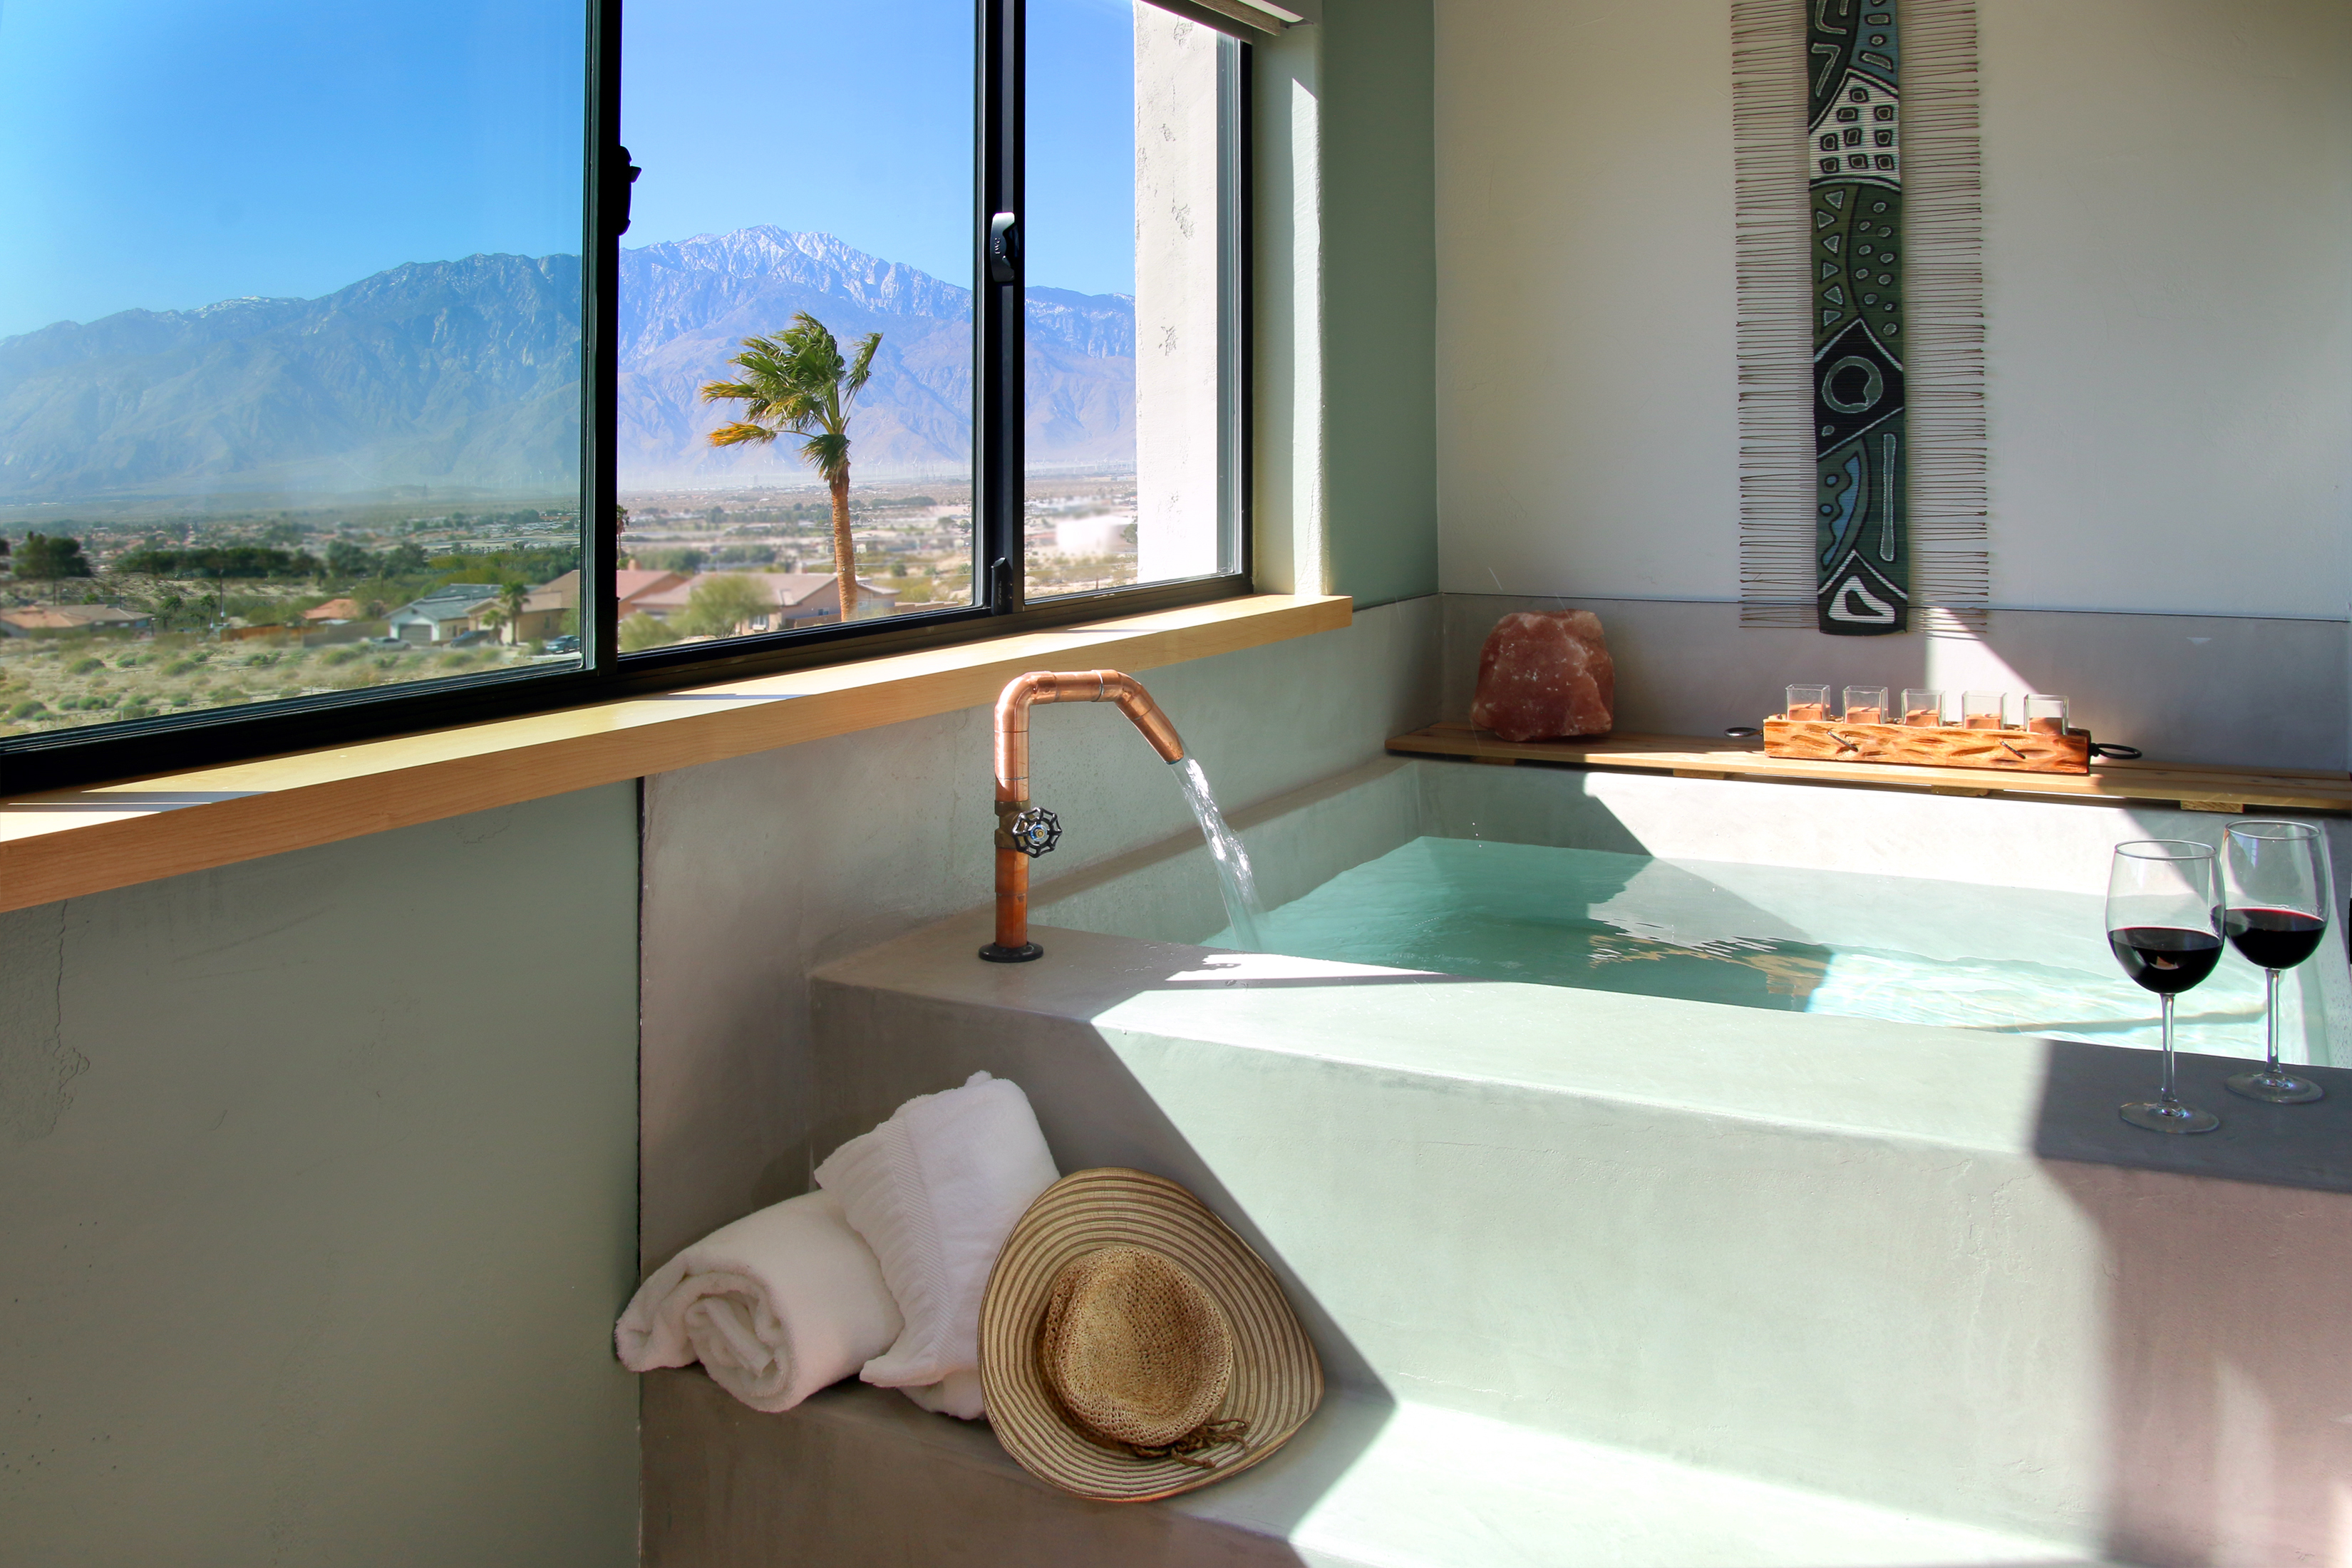 Review The Azure Palm Springs Has In-Room Hot Springs Tubs